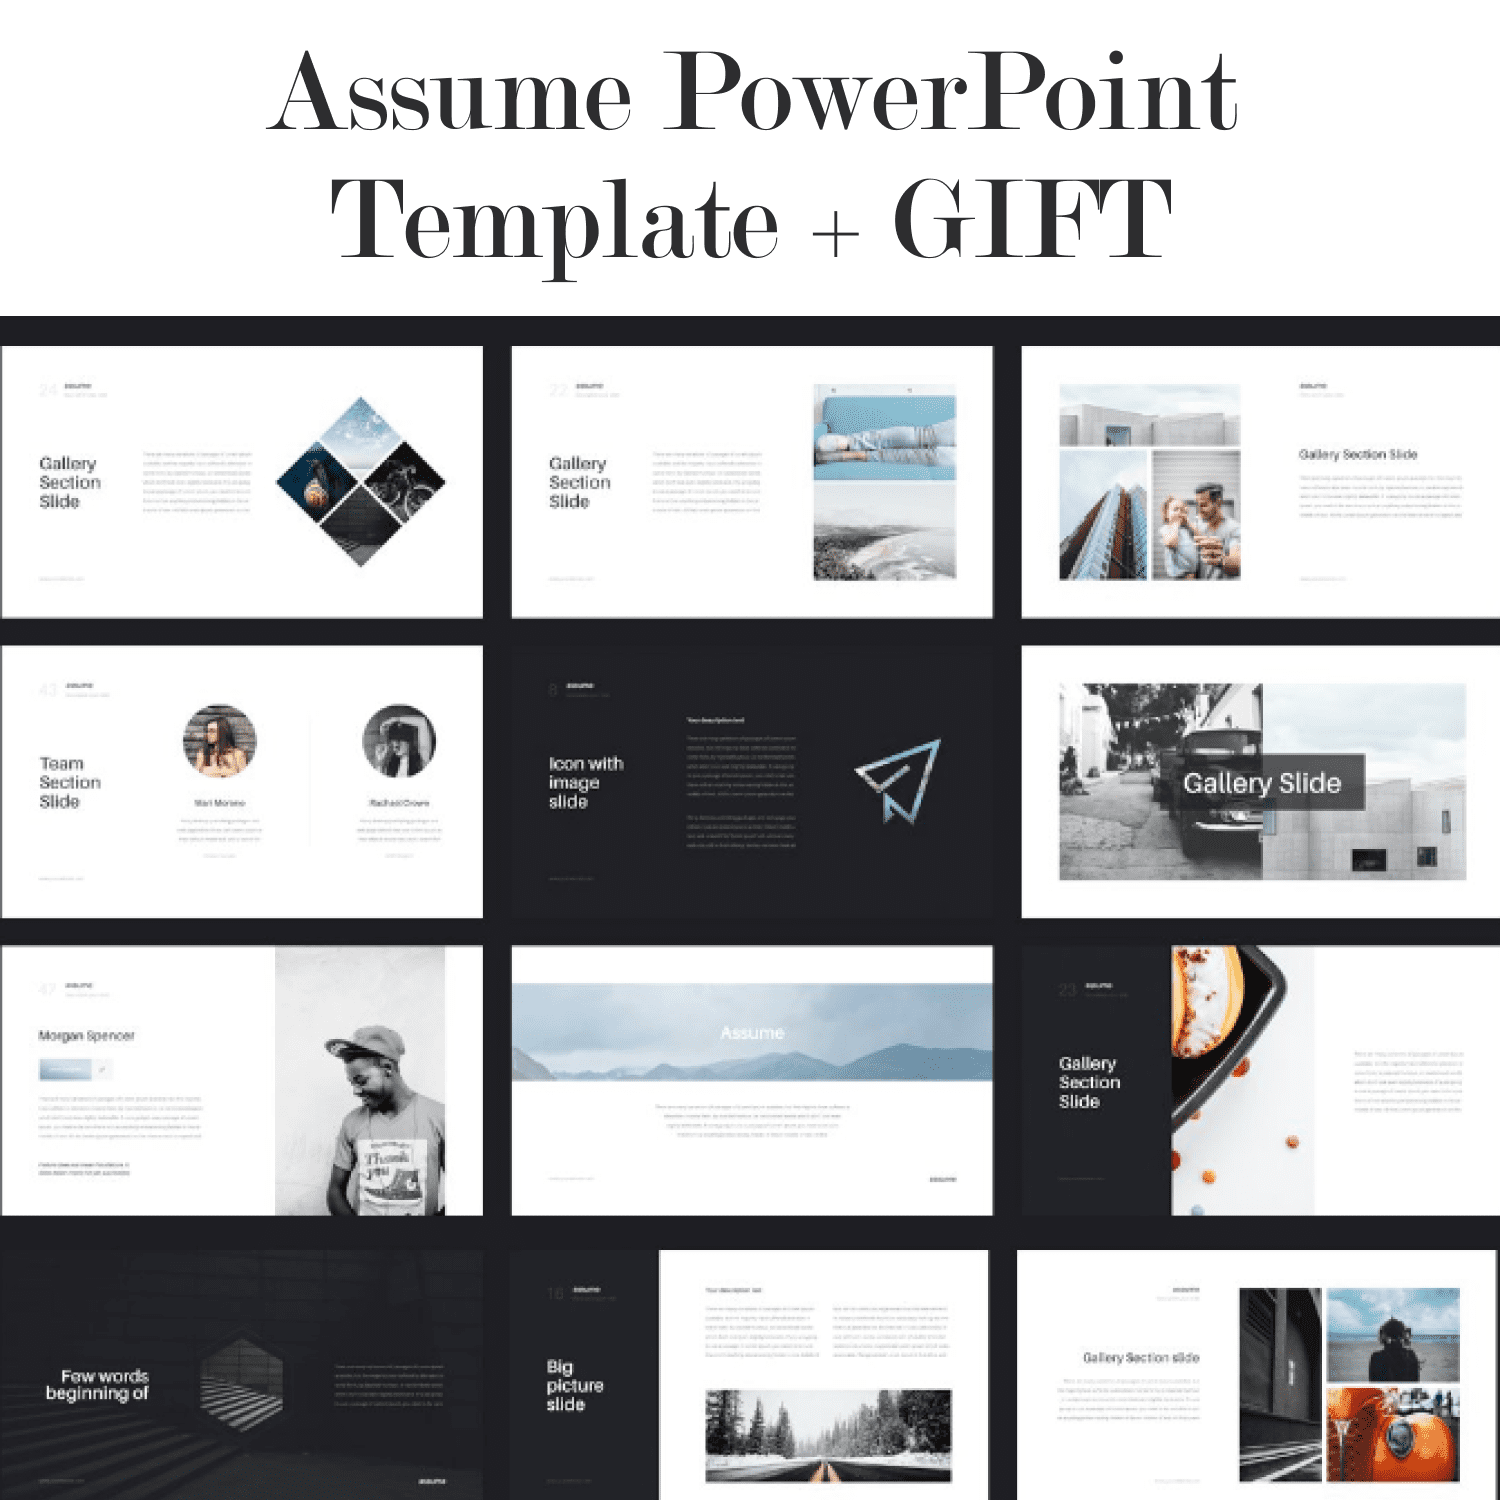 Assume PowerPoint Template + GIFT cover image.